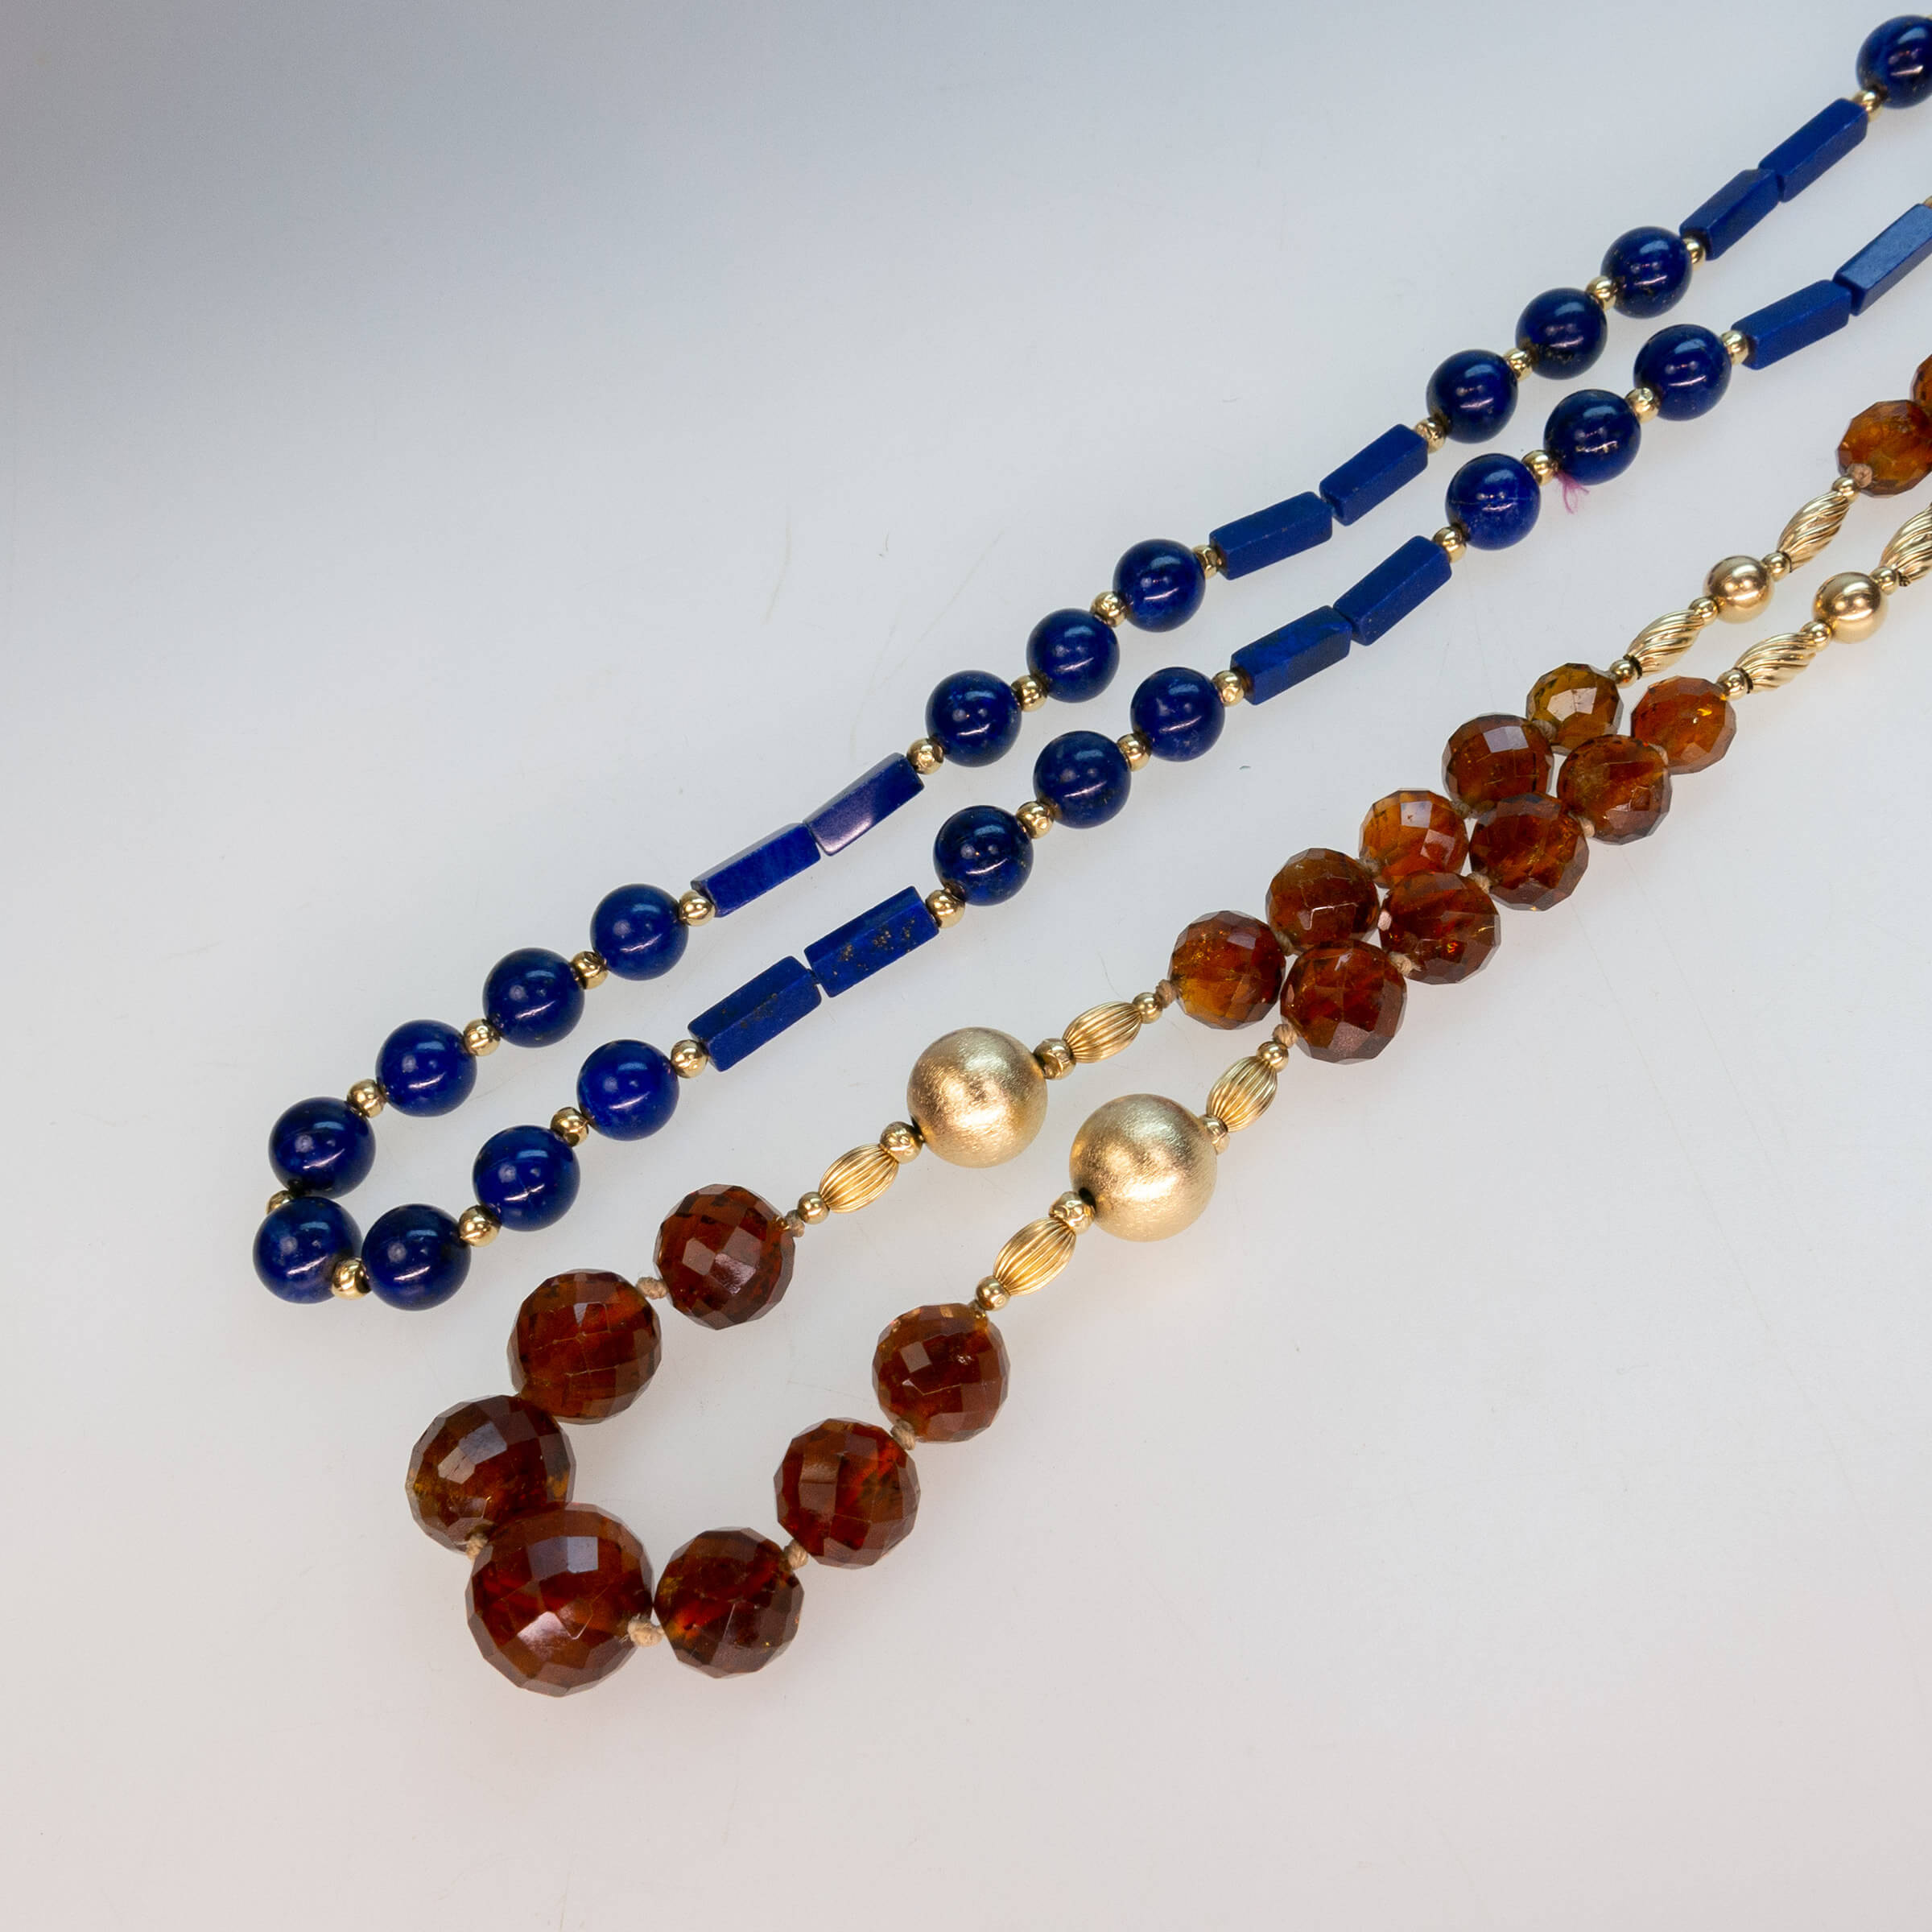 Endless Single Strand Lapis And Facetted Citrine Bead Necklaces